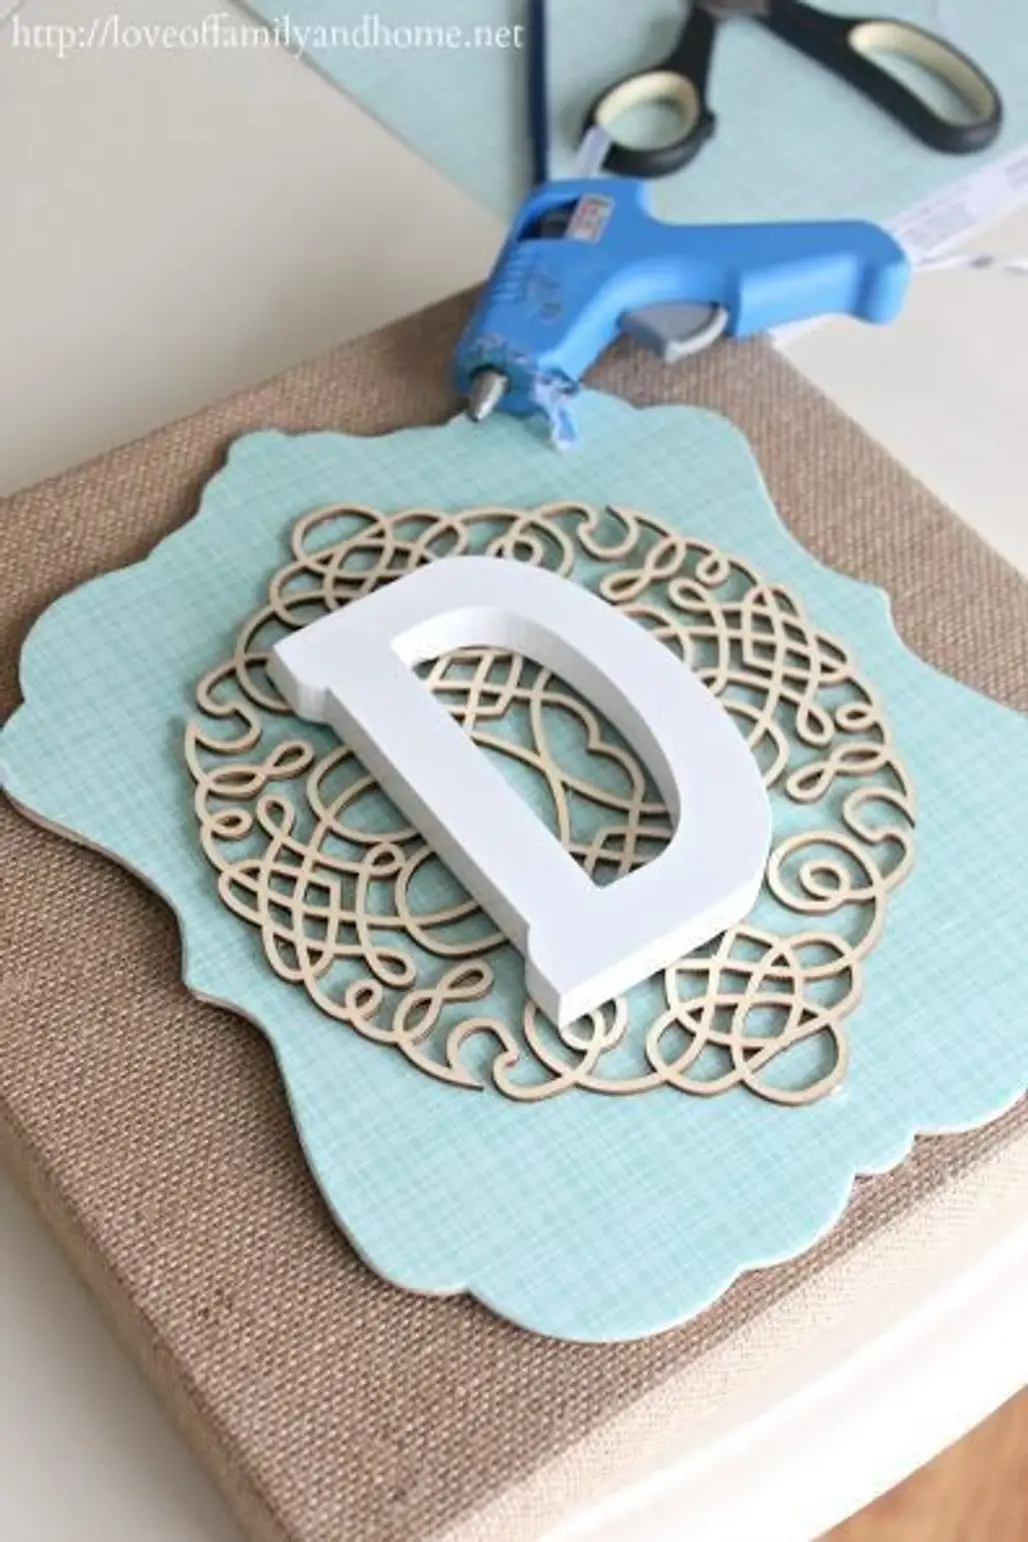 Use in a Monogram Craft